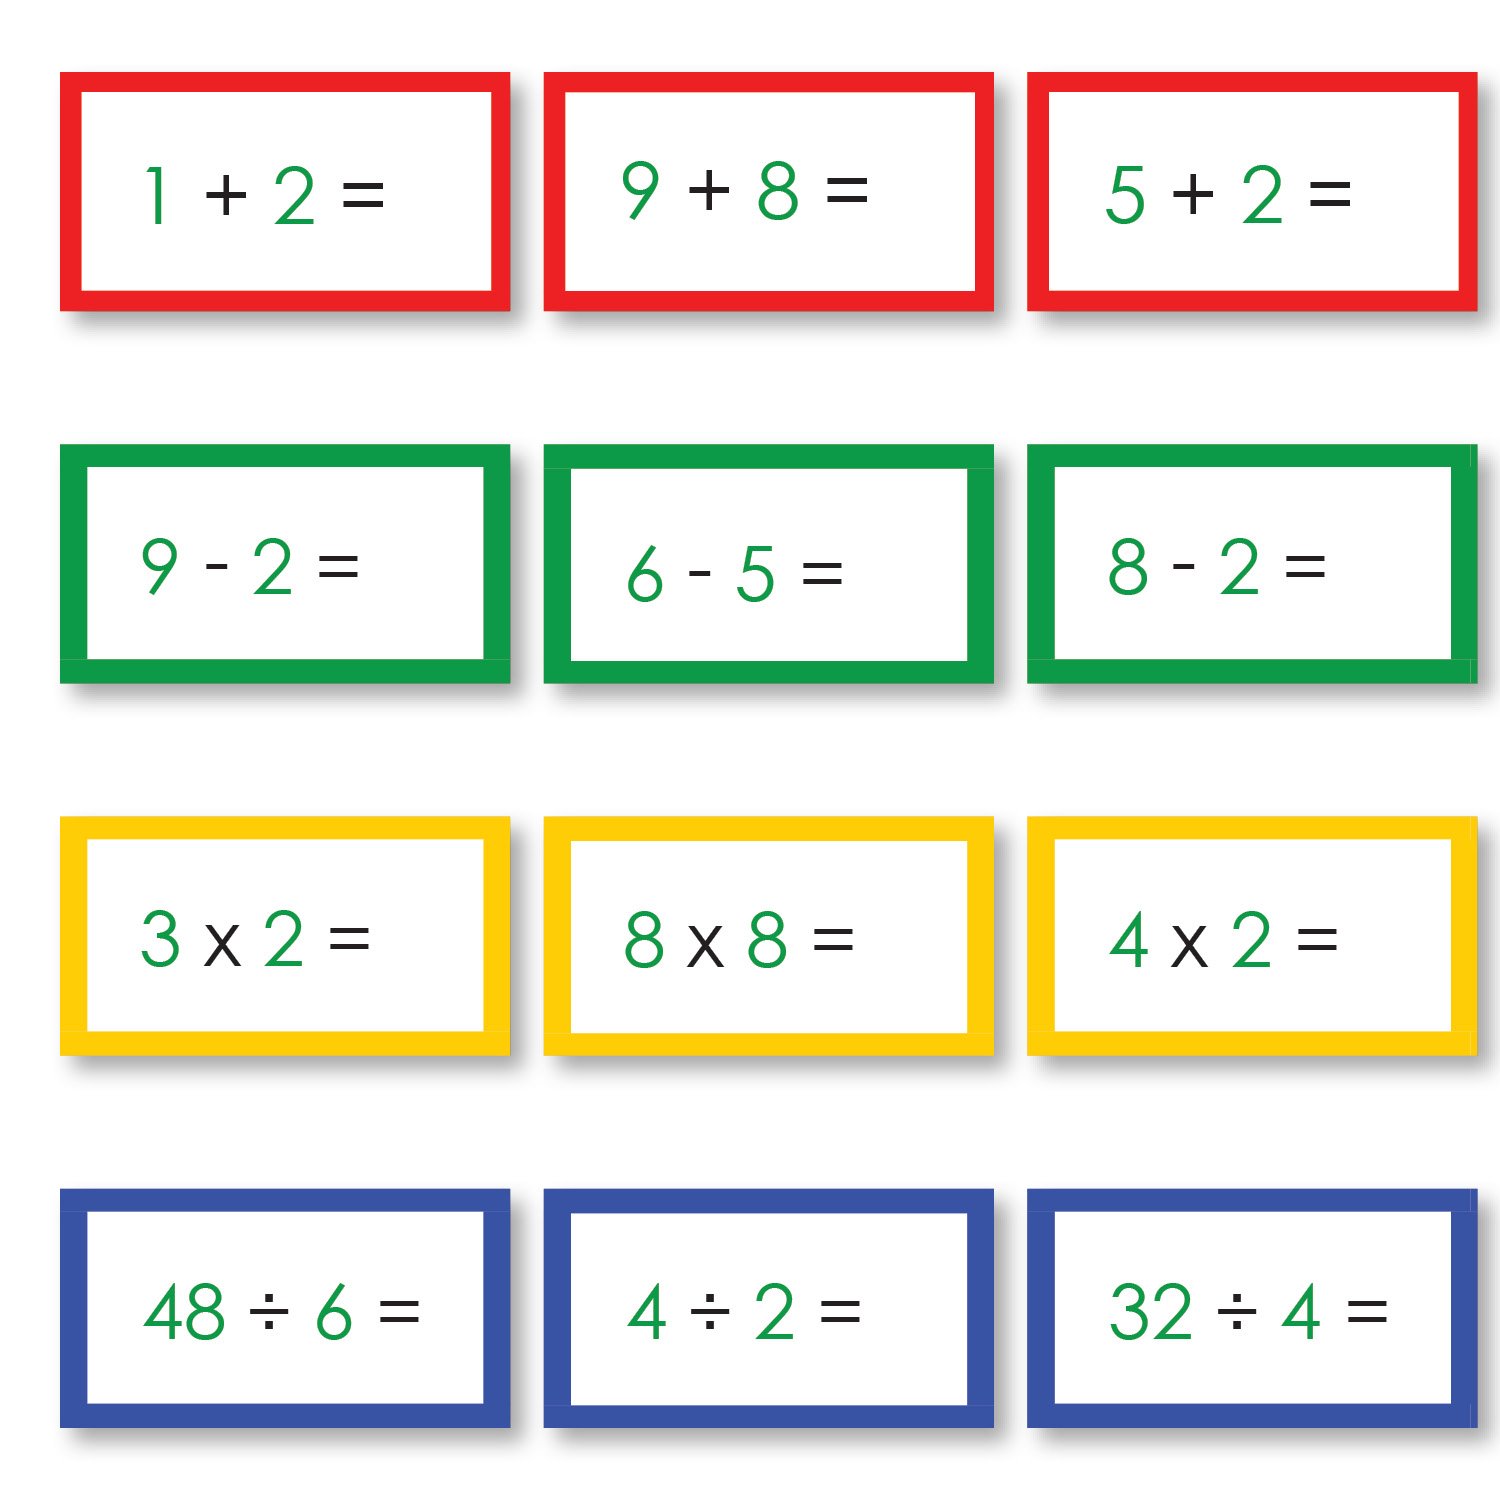 Math Materials-Operations - Complete Set Of Math Problems For All Operations